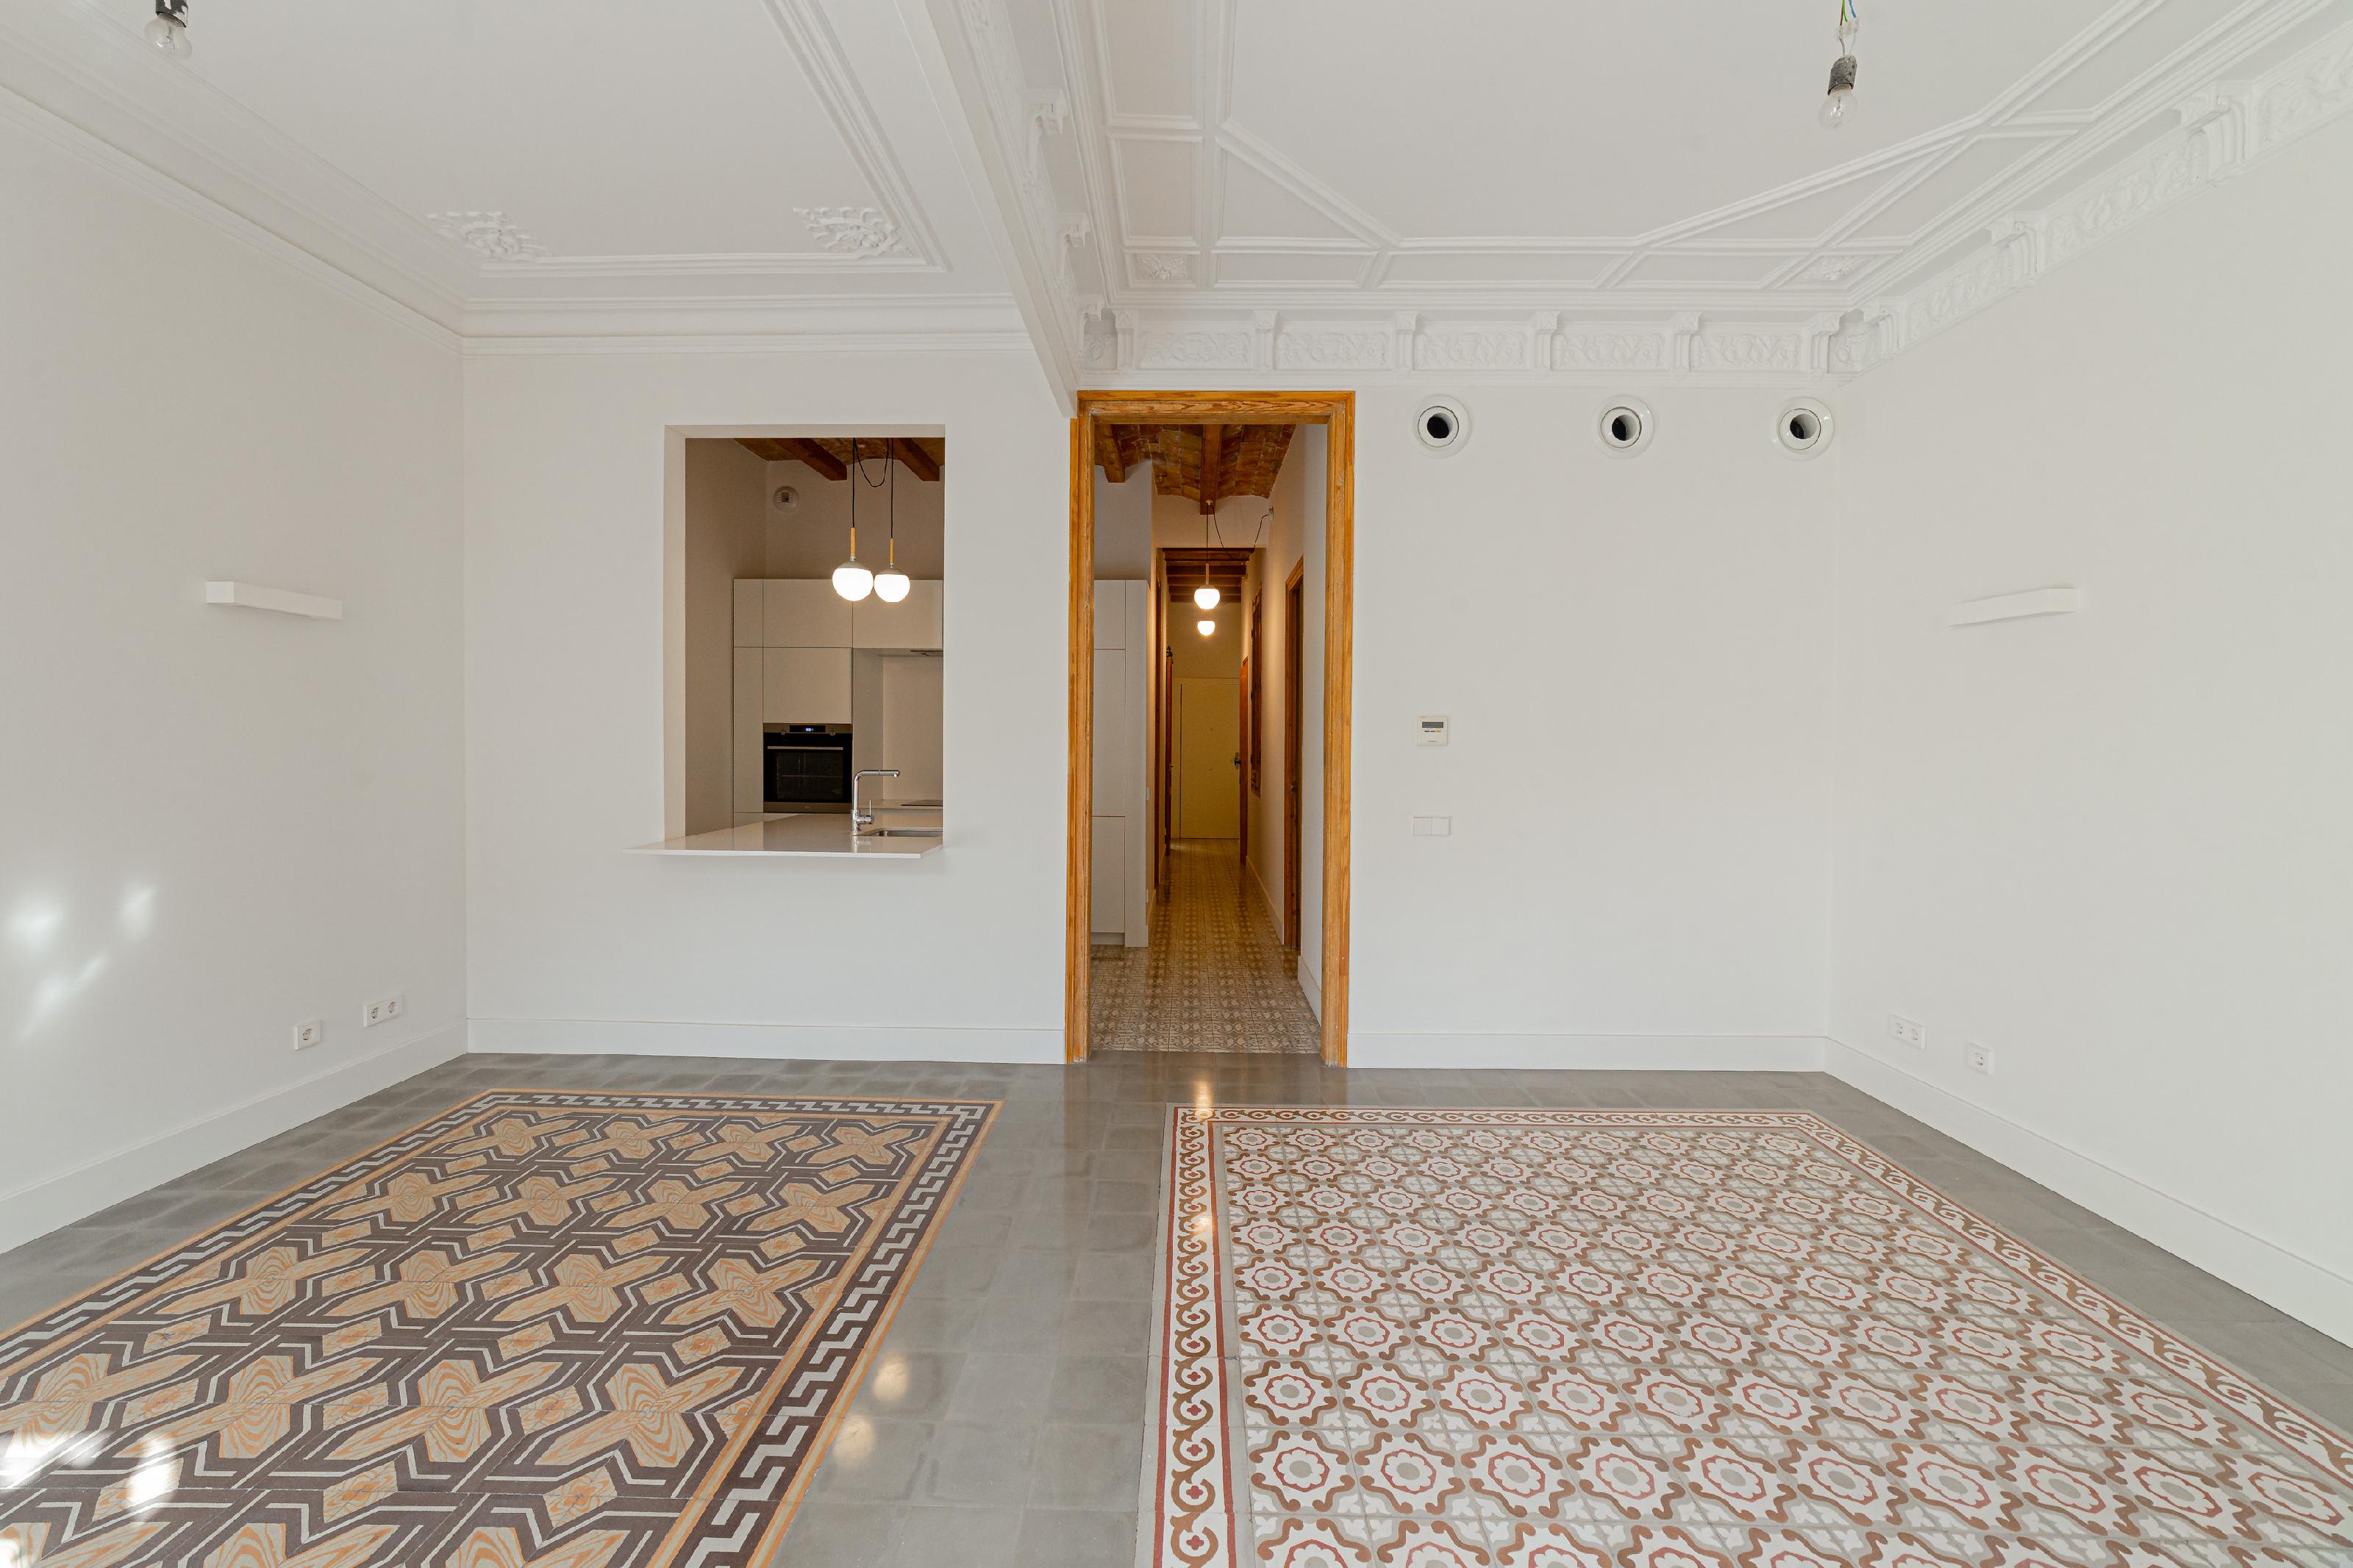 275557 Flat for sale in Eixample, Old Esquerre Eixample 17